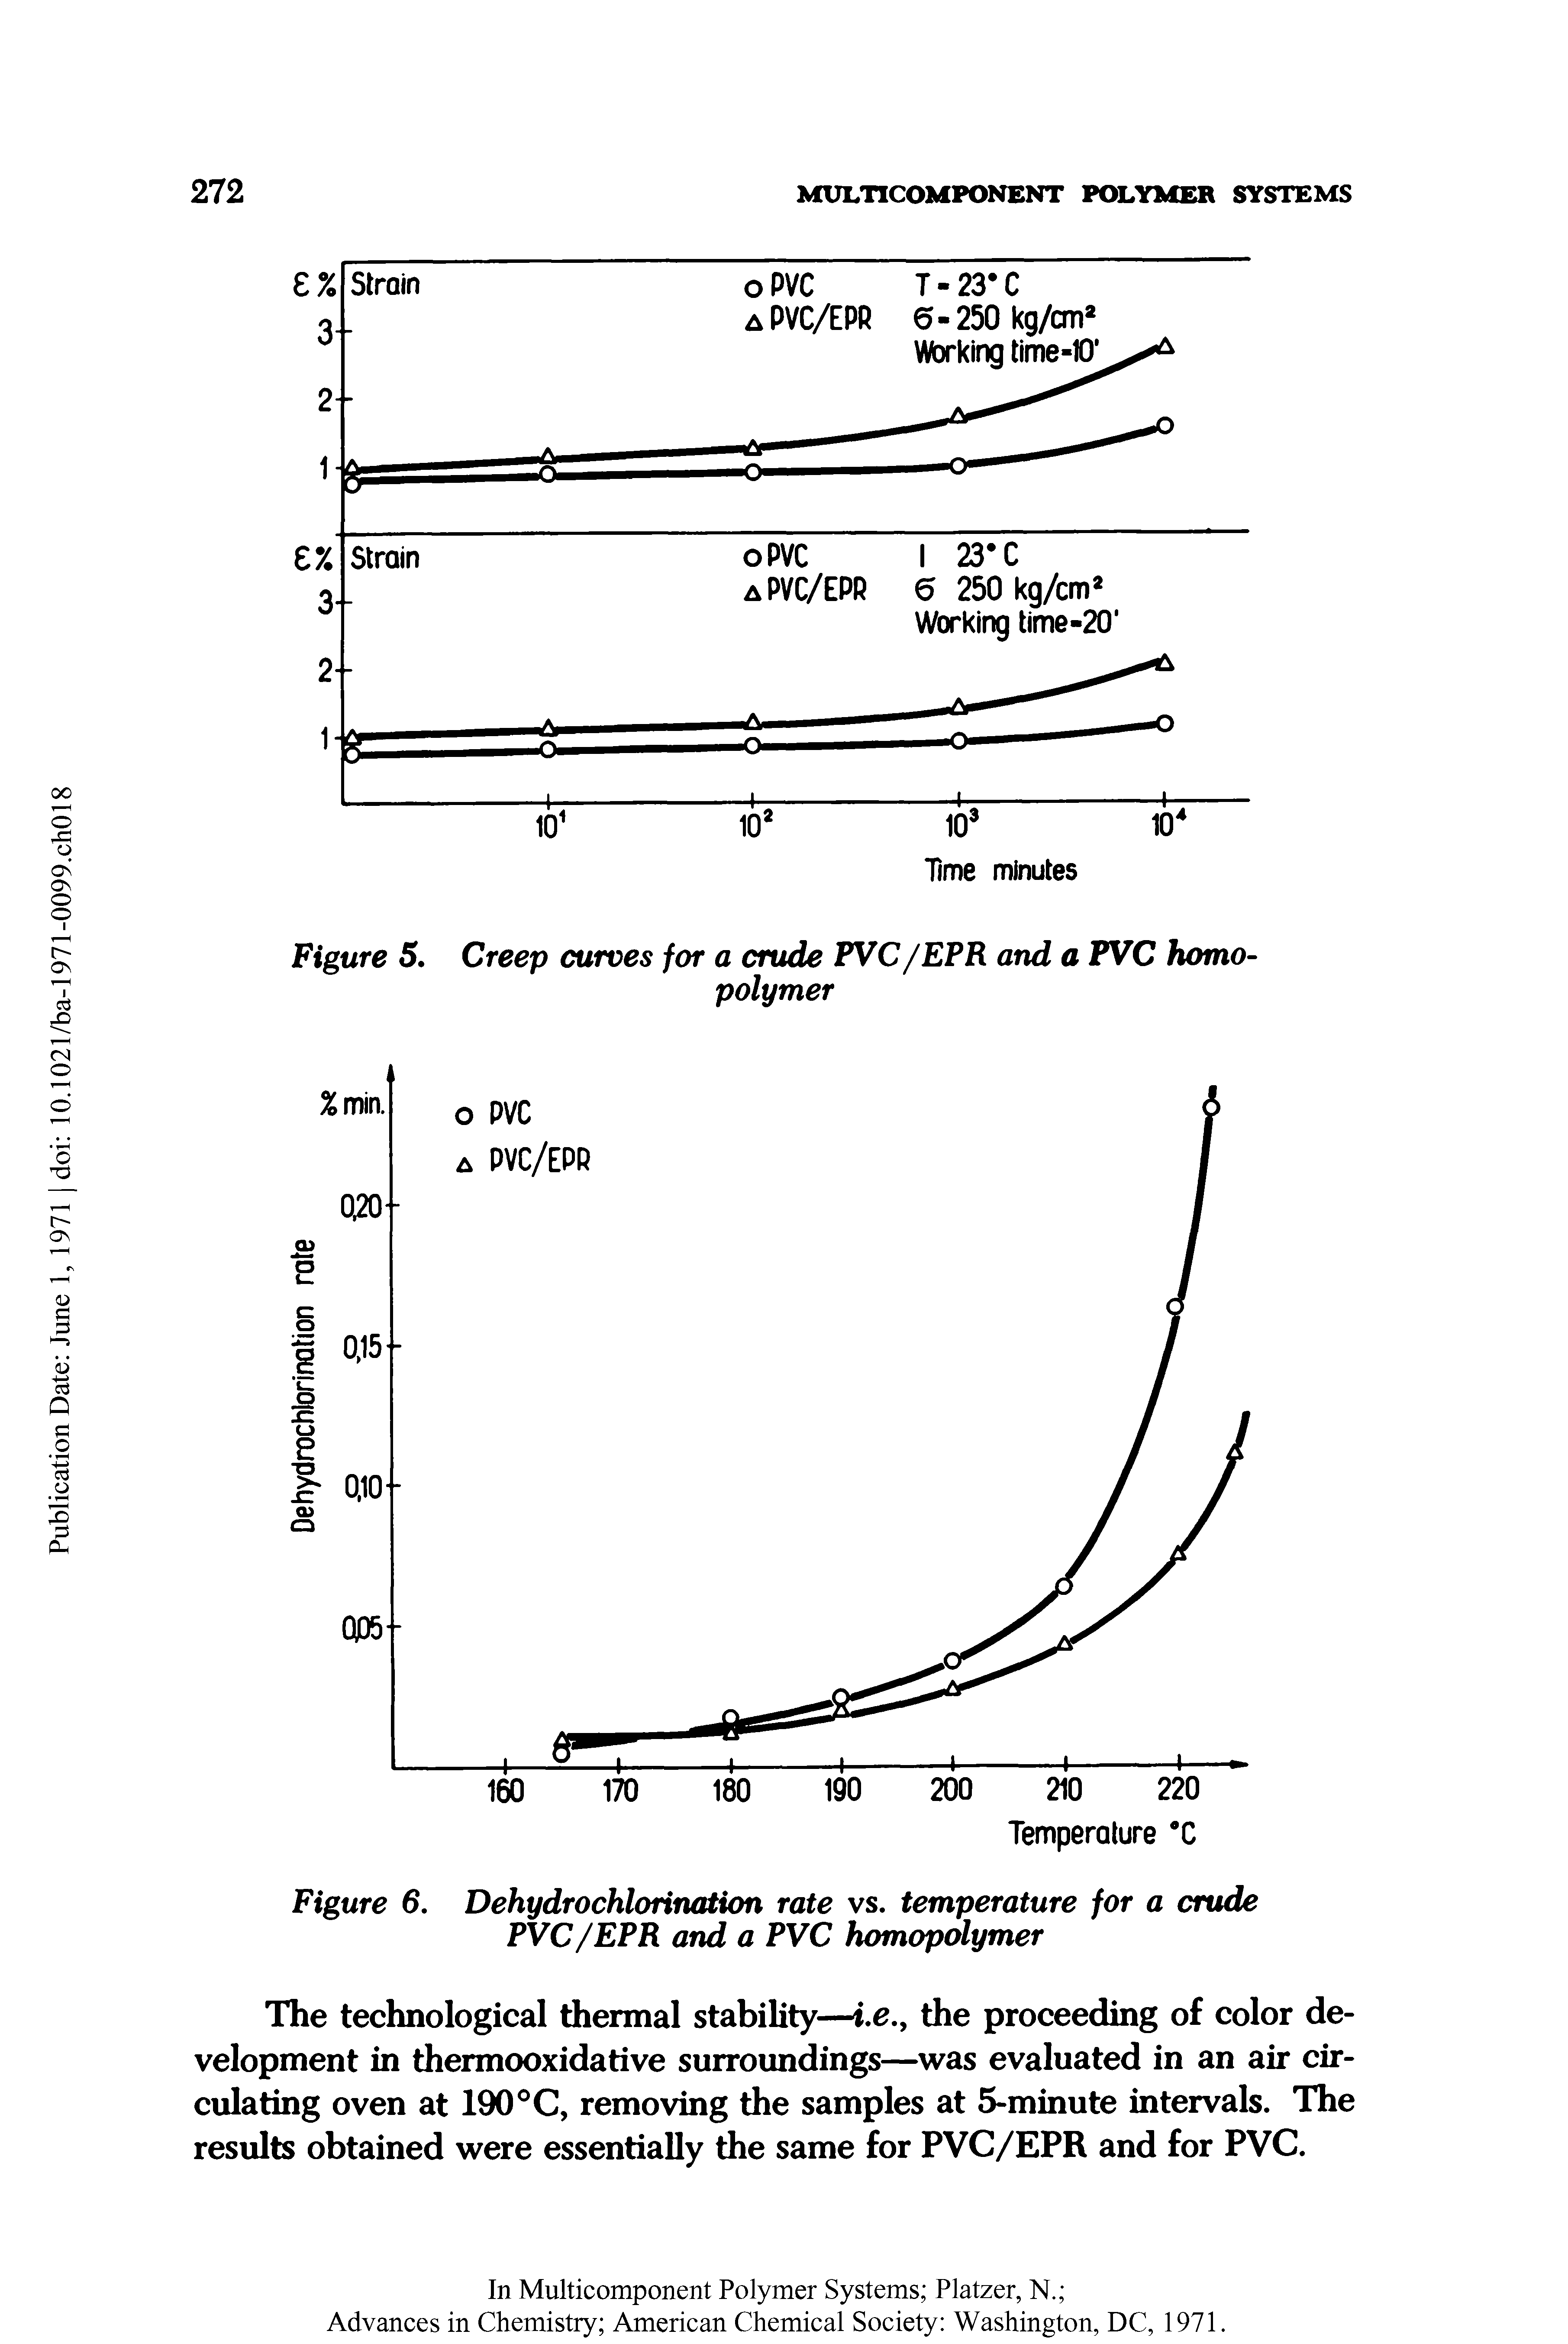 Figure 6. Dehydrochlorination rate vs. temperature for a crude FVC/EPR and a PVC homopolymer...